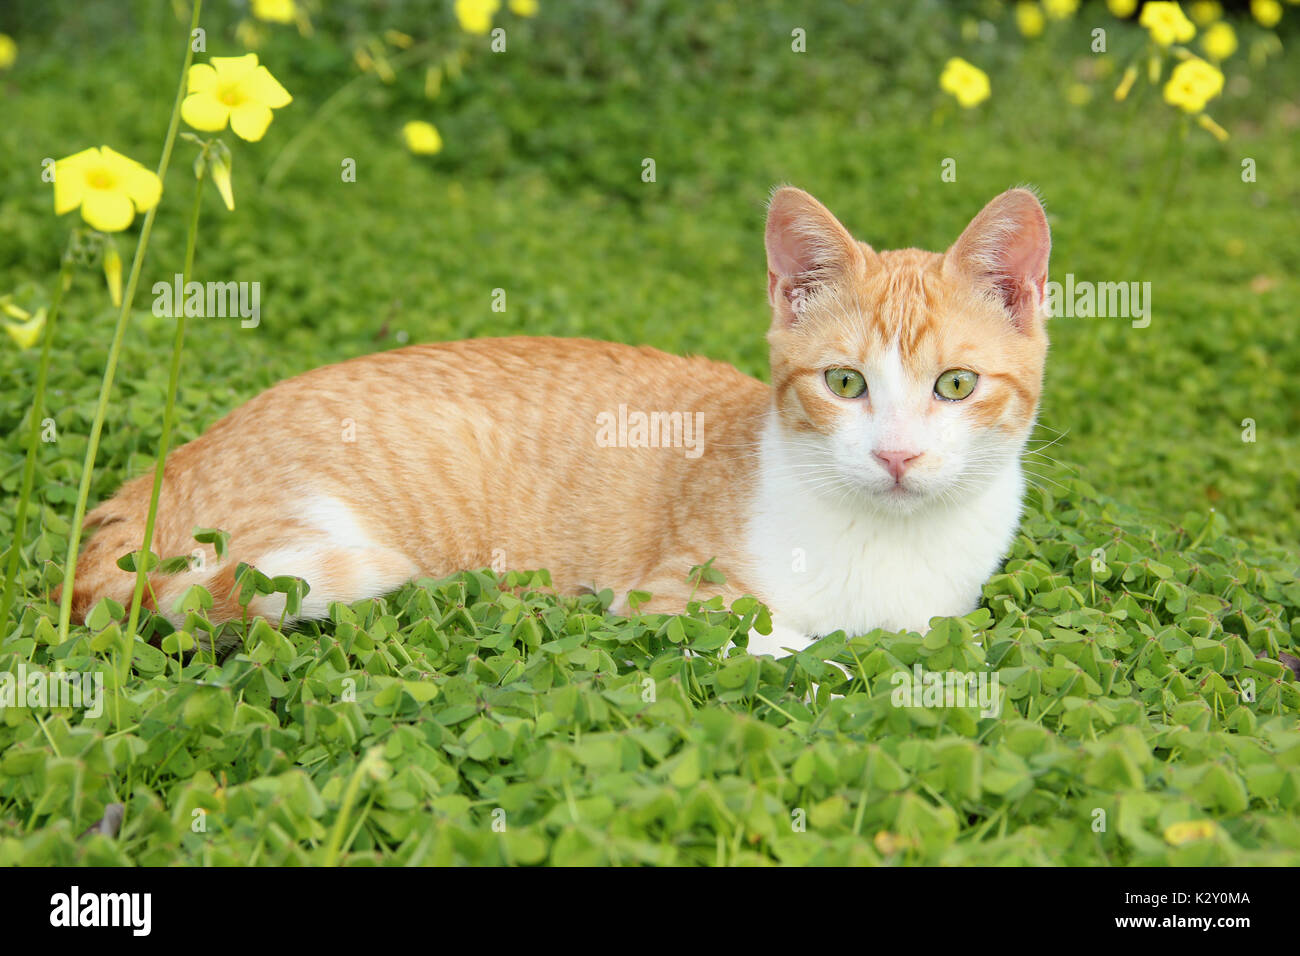 domestic cat, red tabby white, lying on a meadow with clover Stock Photo